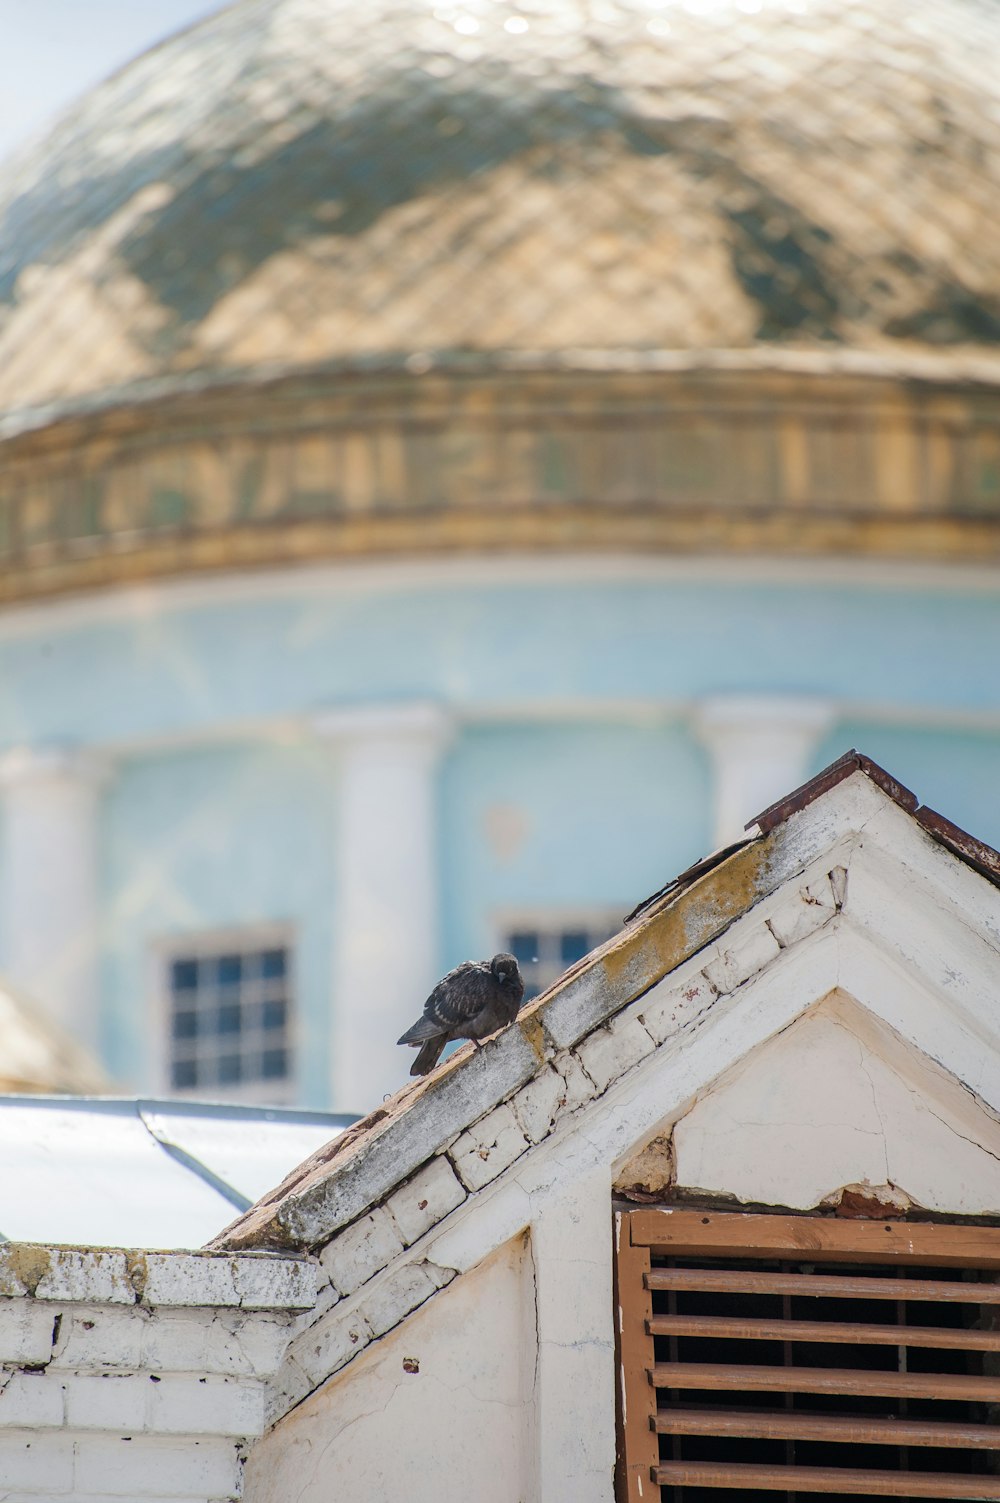 a bird sitting on the roof of a building